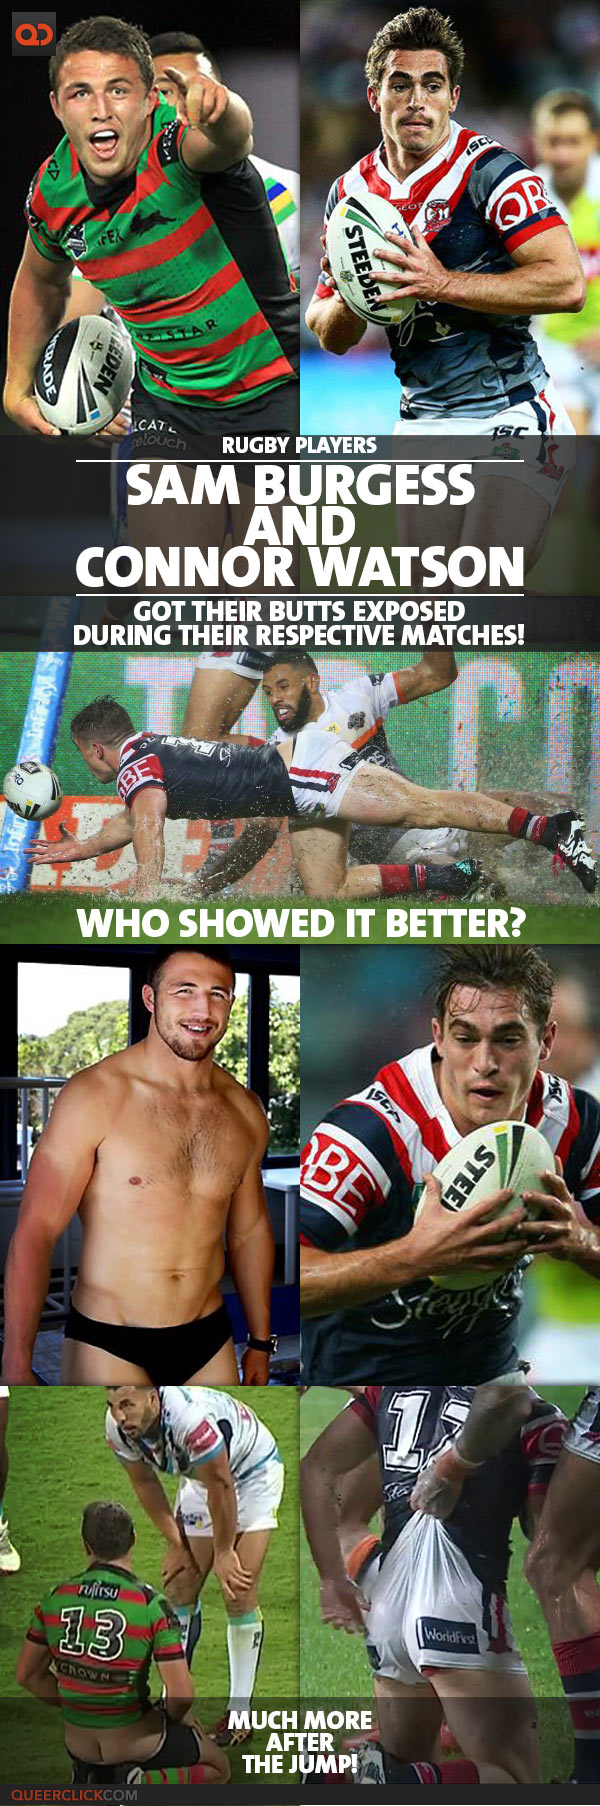 qc-rugby_players_sam_burgess_and_connor_watson_butts_exposed_during_their_matches-teaser